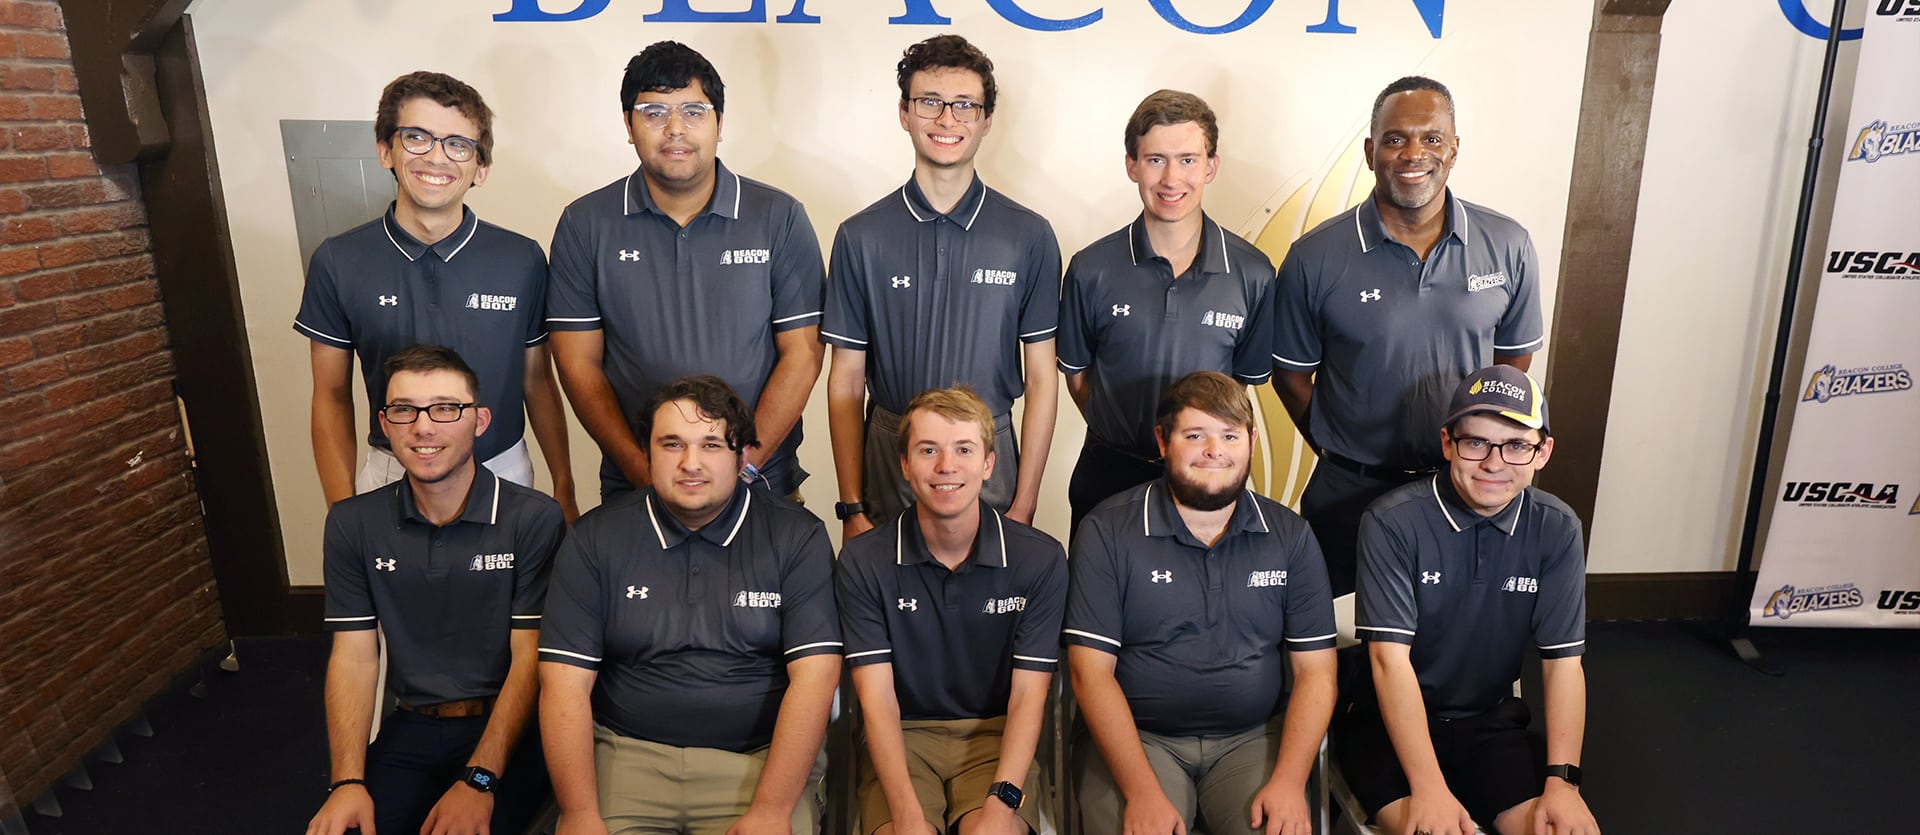 Golf Roster Photo